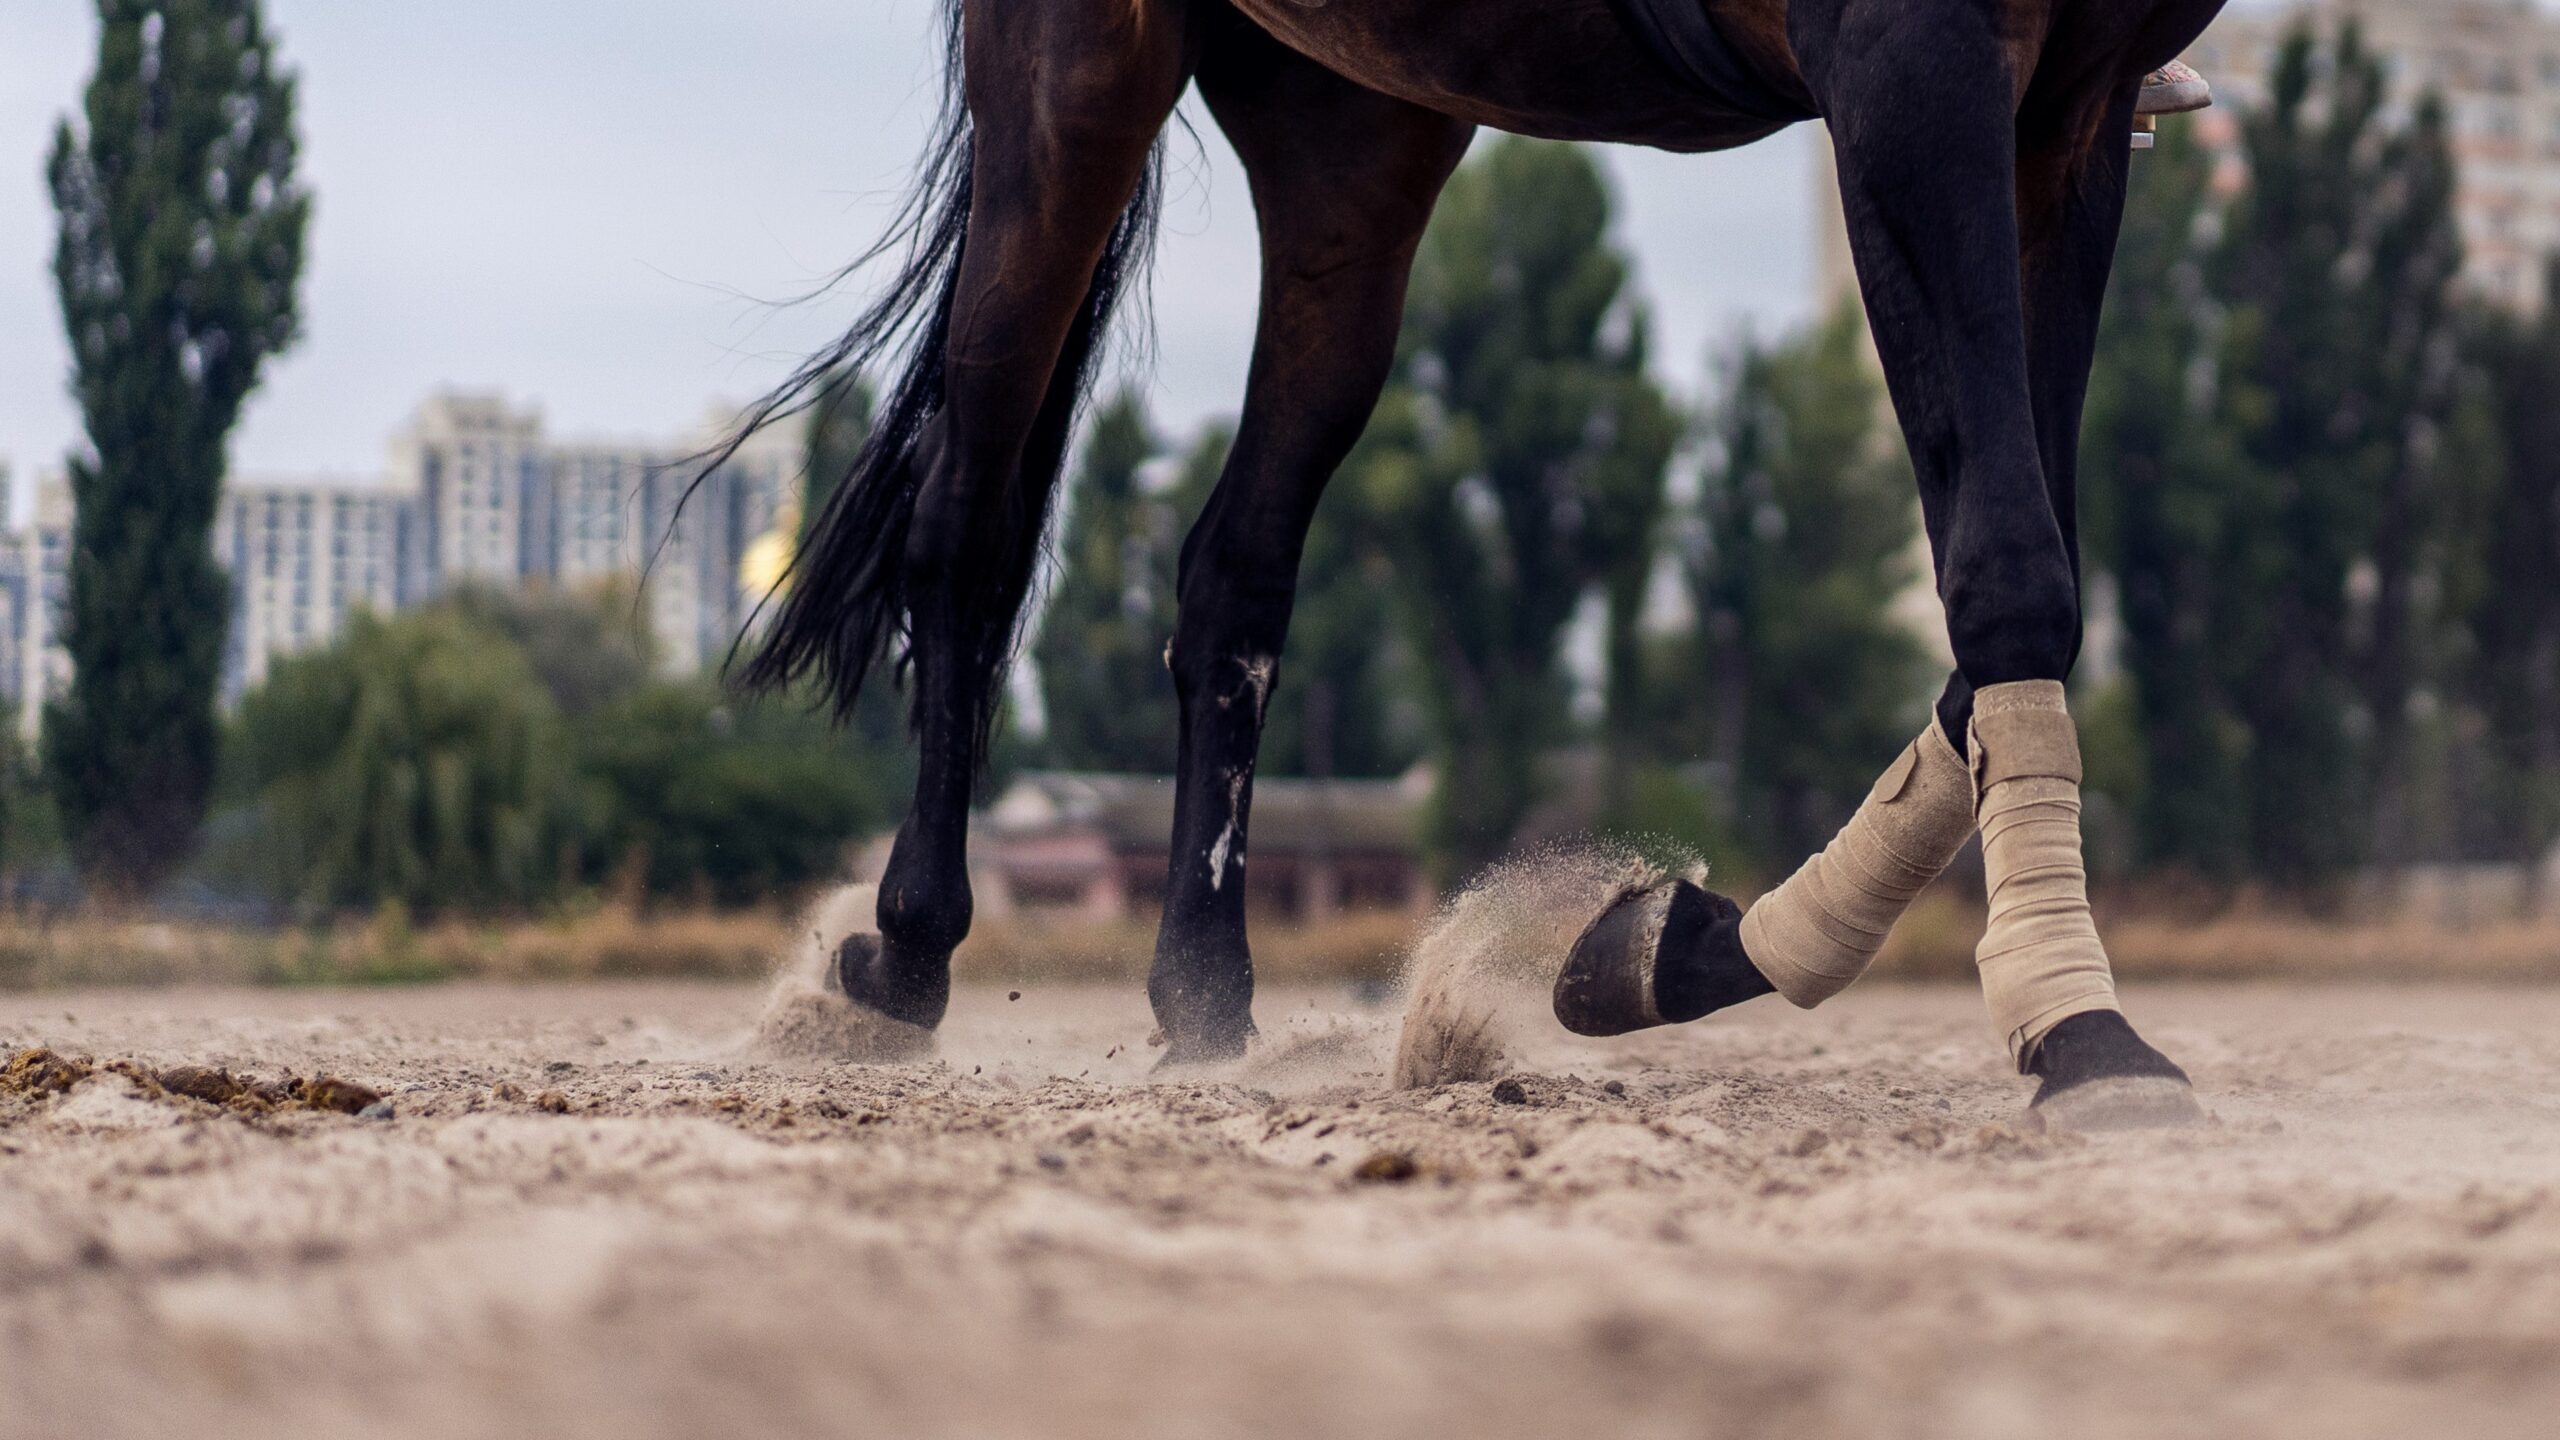 Horse cantering in the dirt